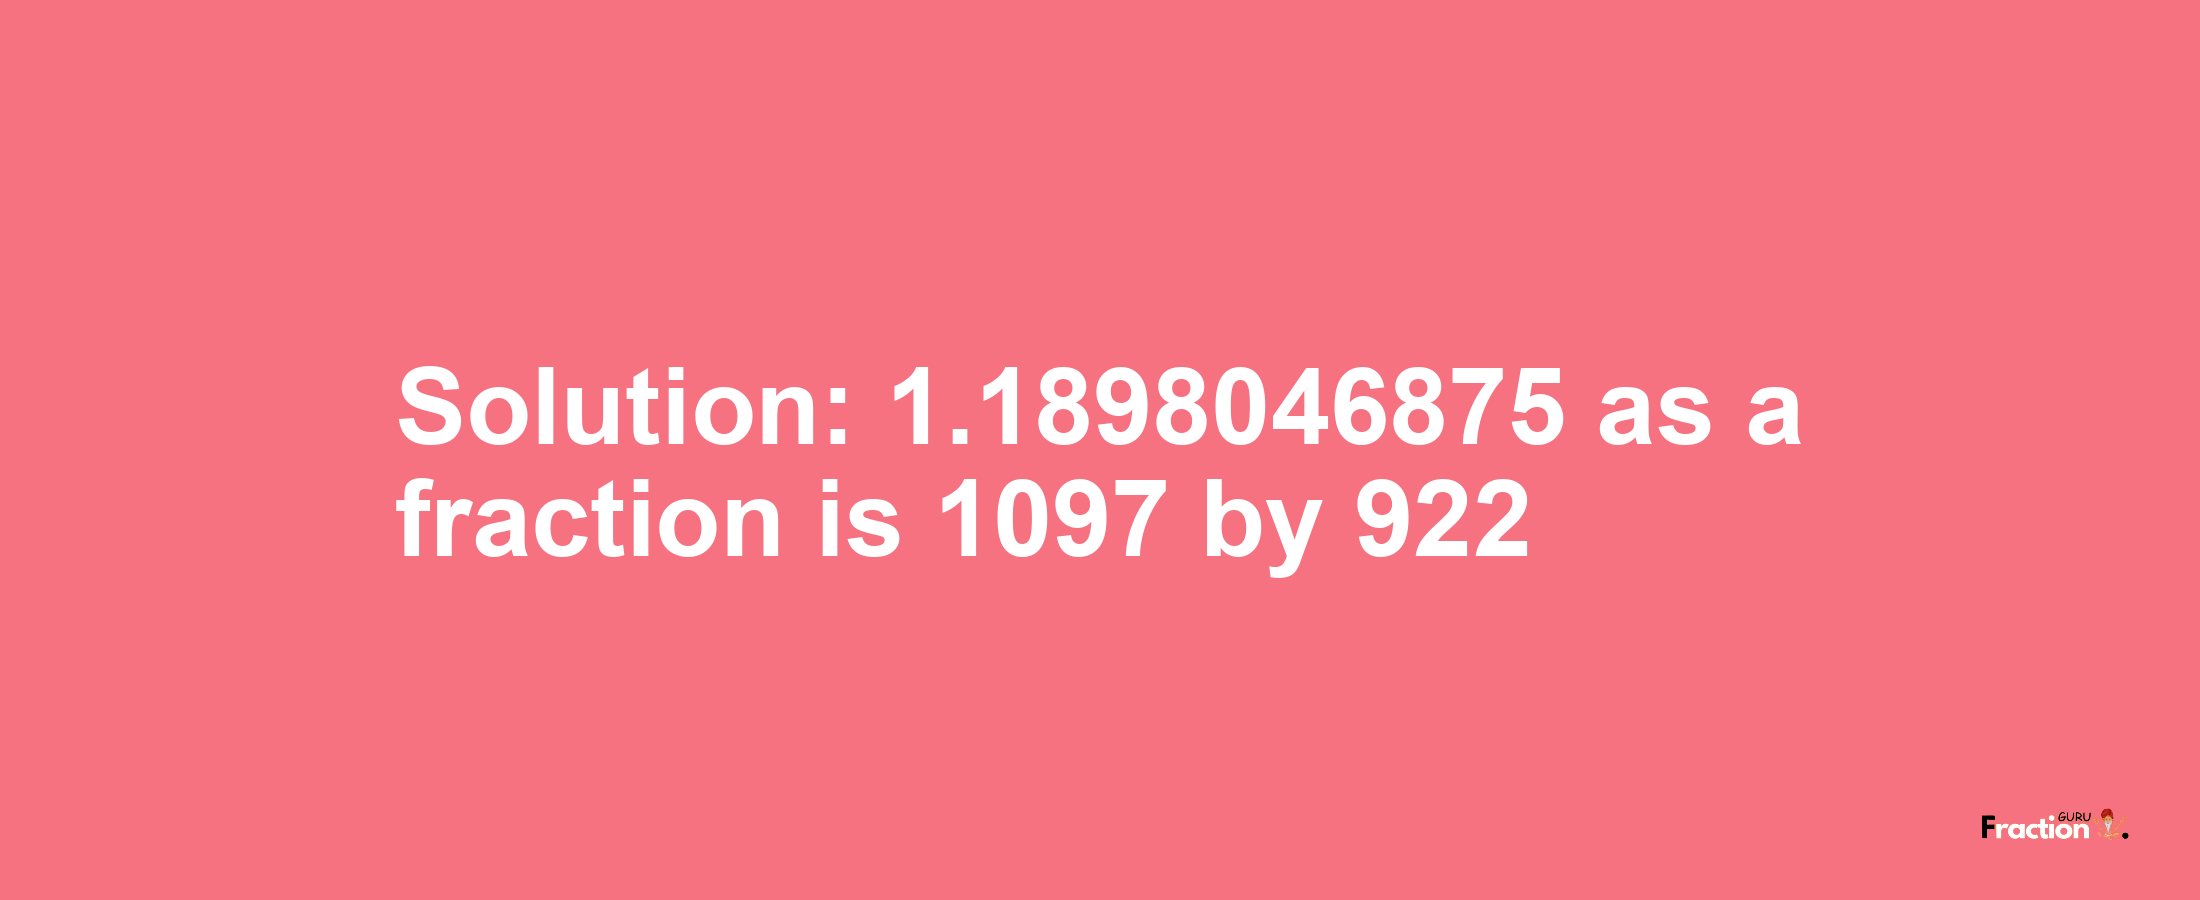 Solution:1.1898046875 as a fraction is 1097/922